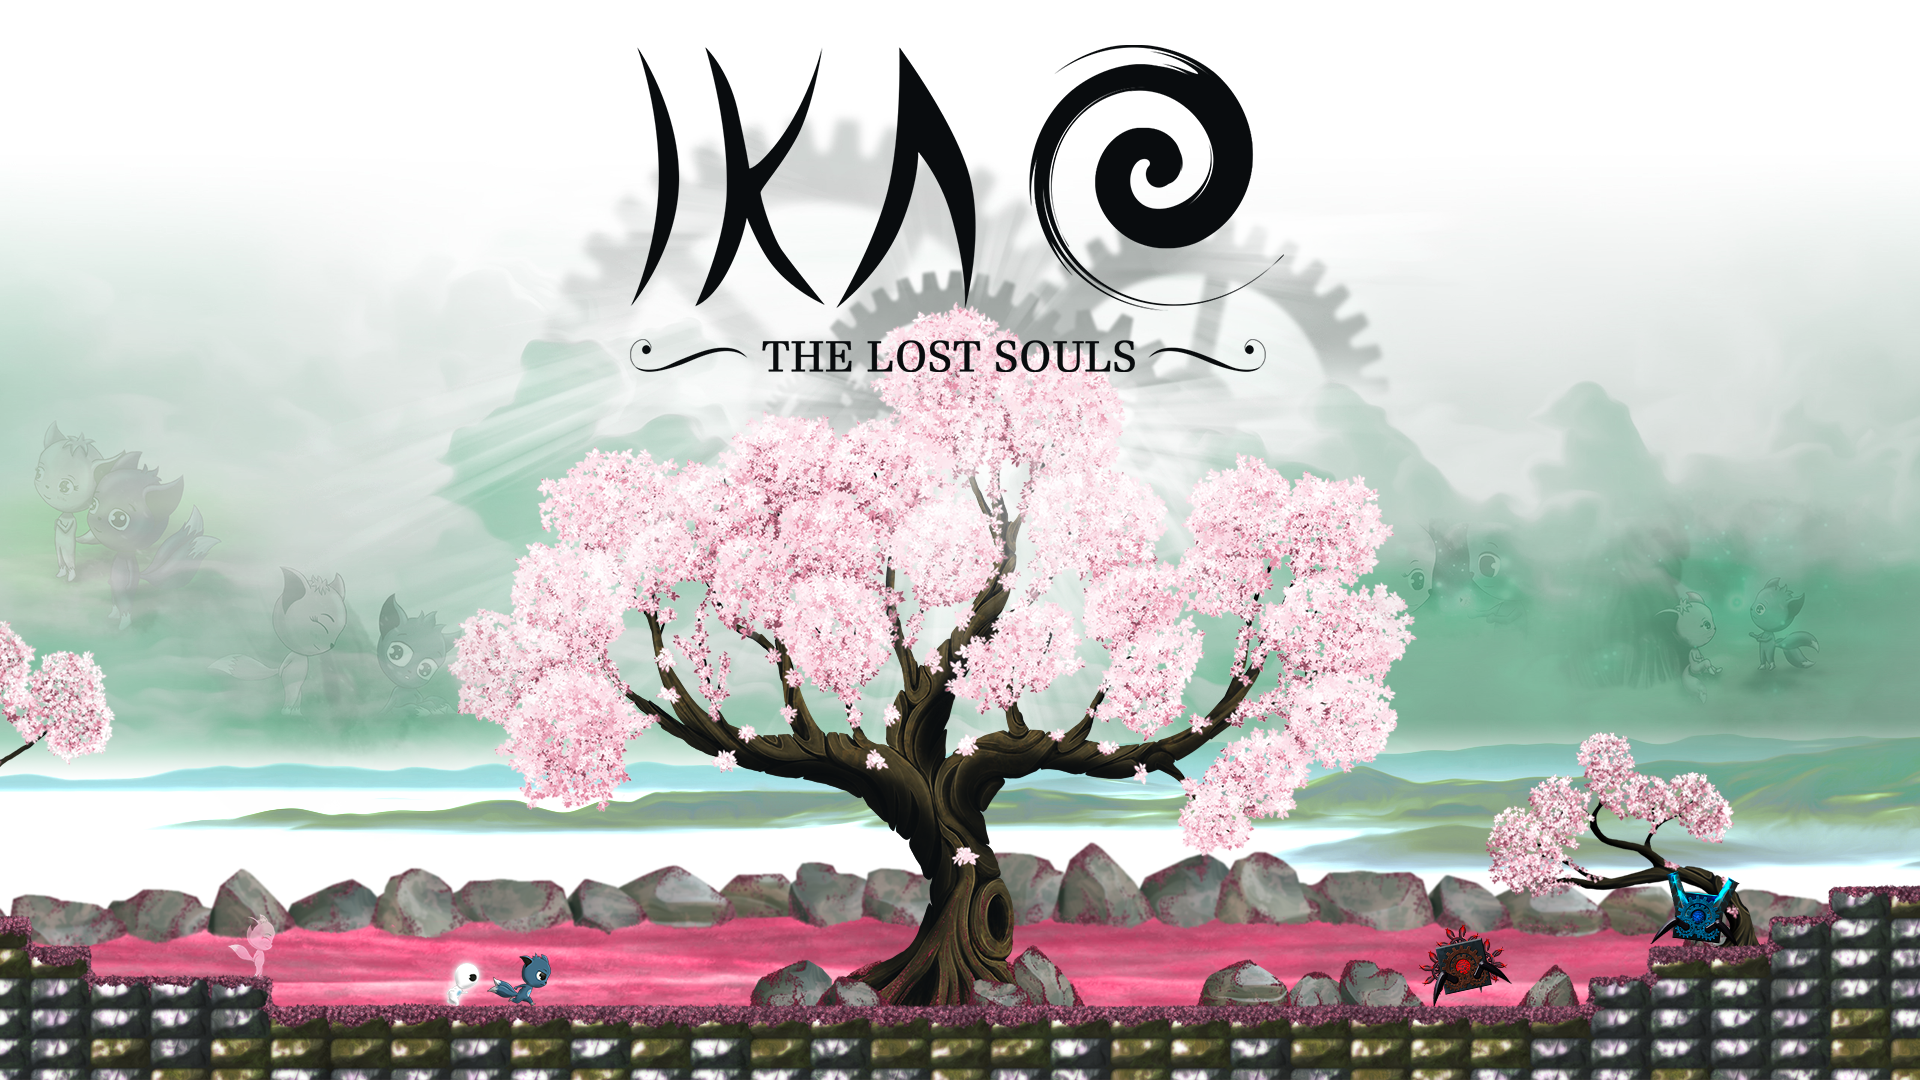 Ikao The Lost Souls